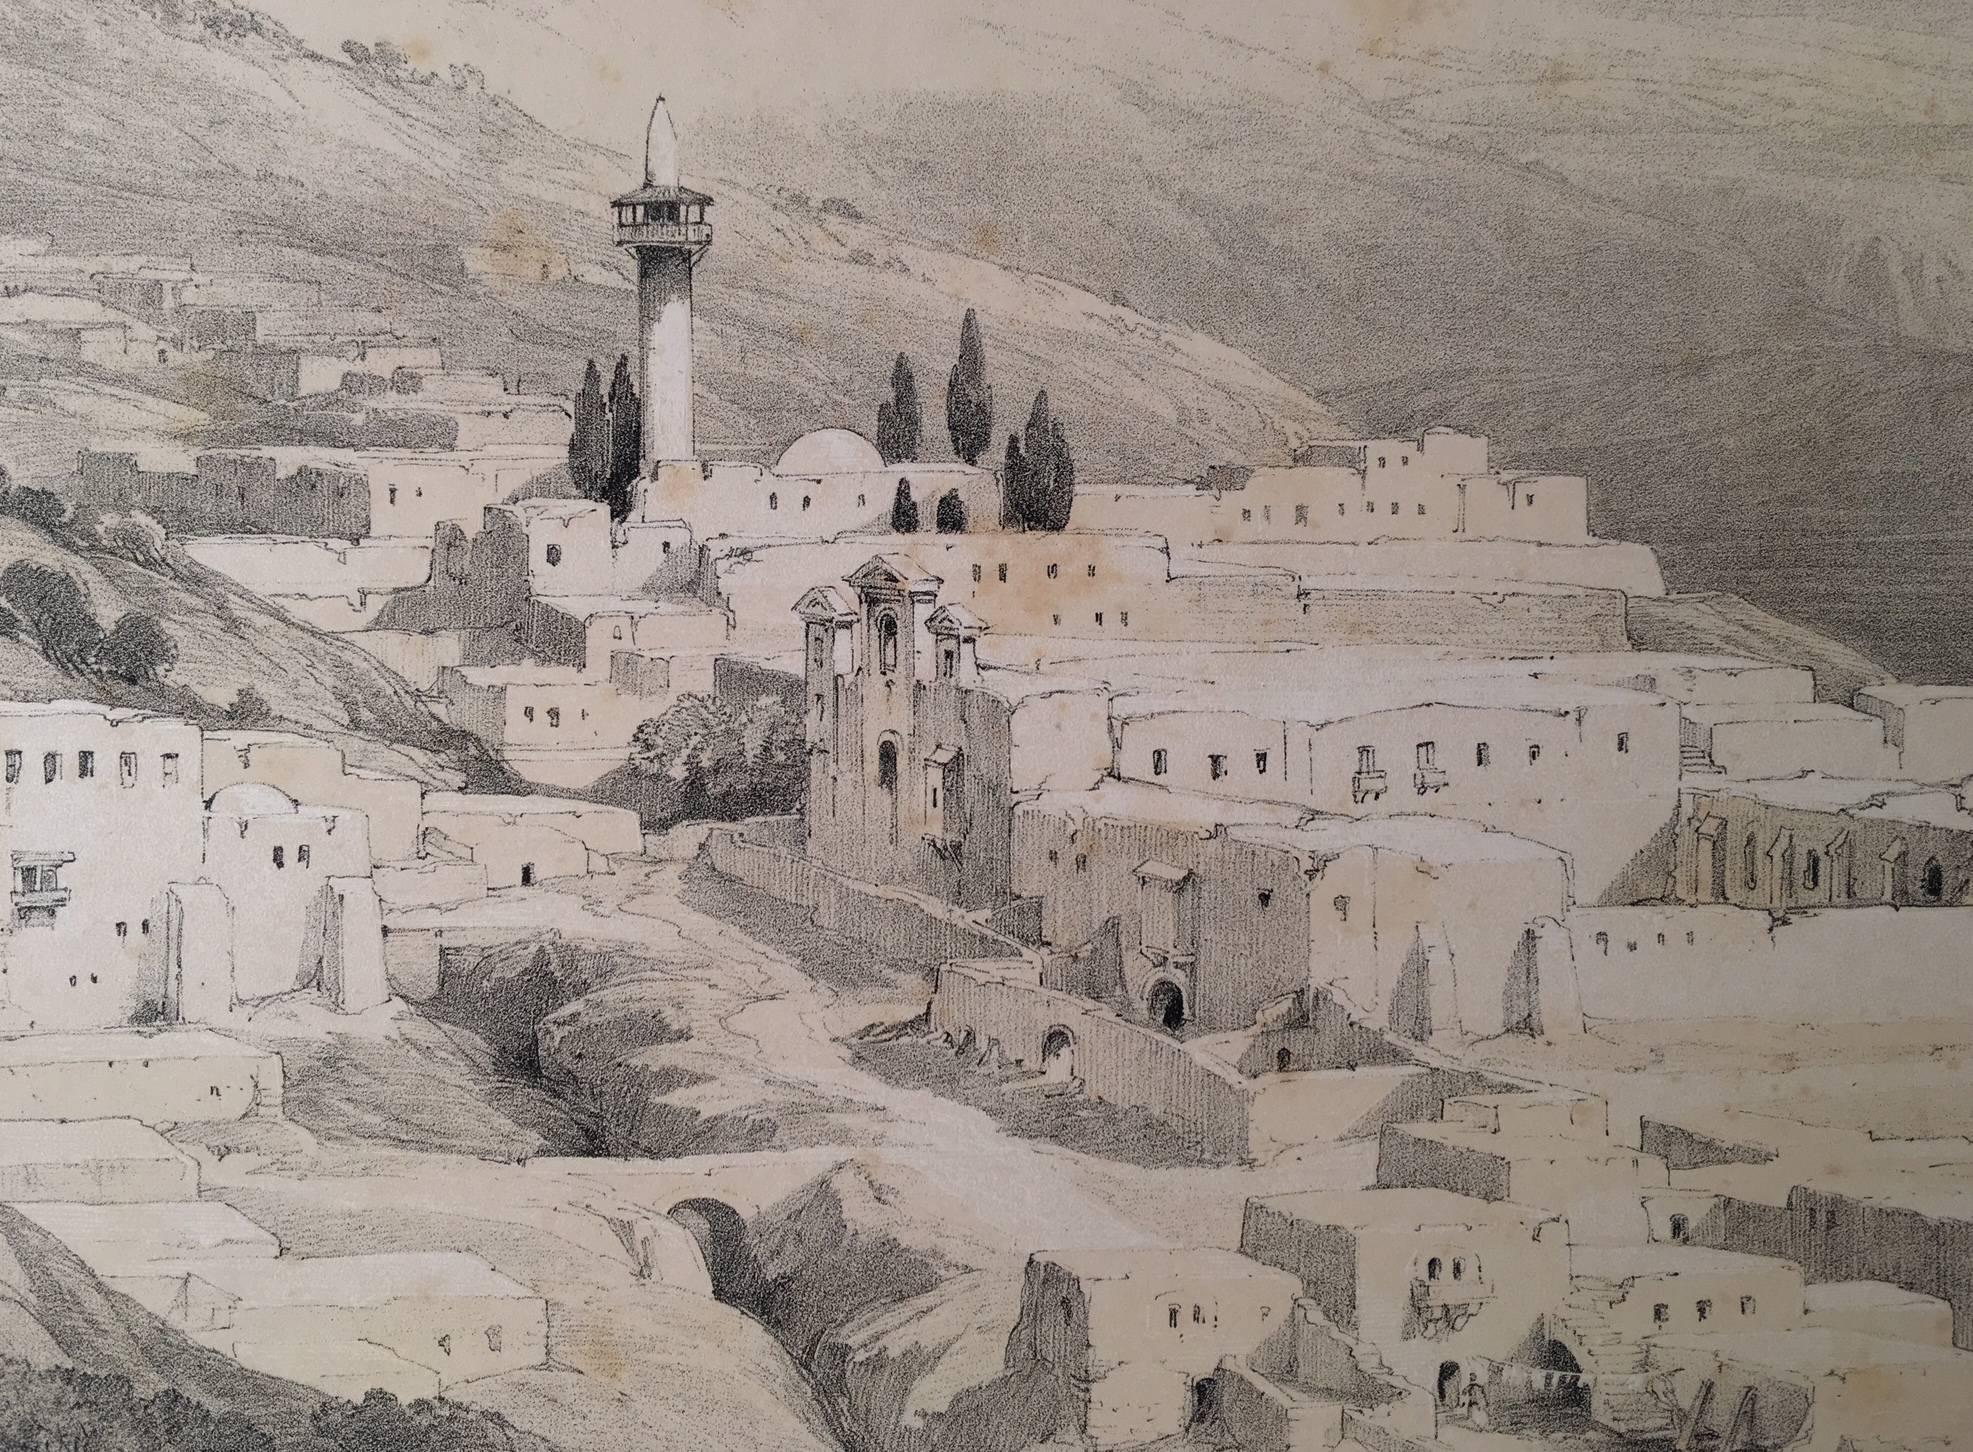 Original hand-colored lithograph by David Roberts (1796 – 1864) published by F.G. Moon, 1844. The Convent of the Terra Santa is one of several magnificent images produced by Roberts during his journey to the Middle East.
David Roberts, considered